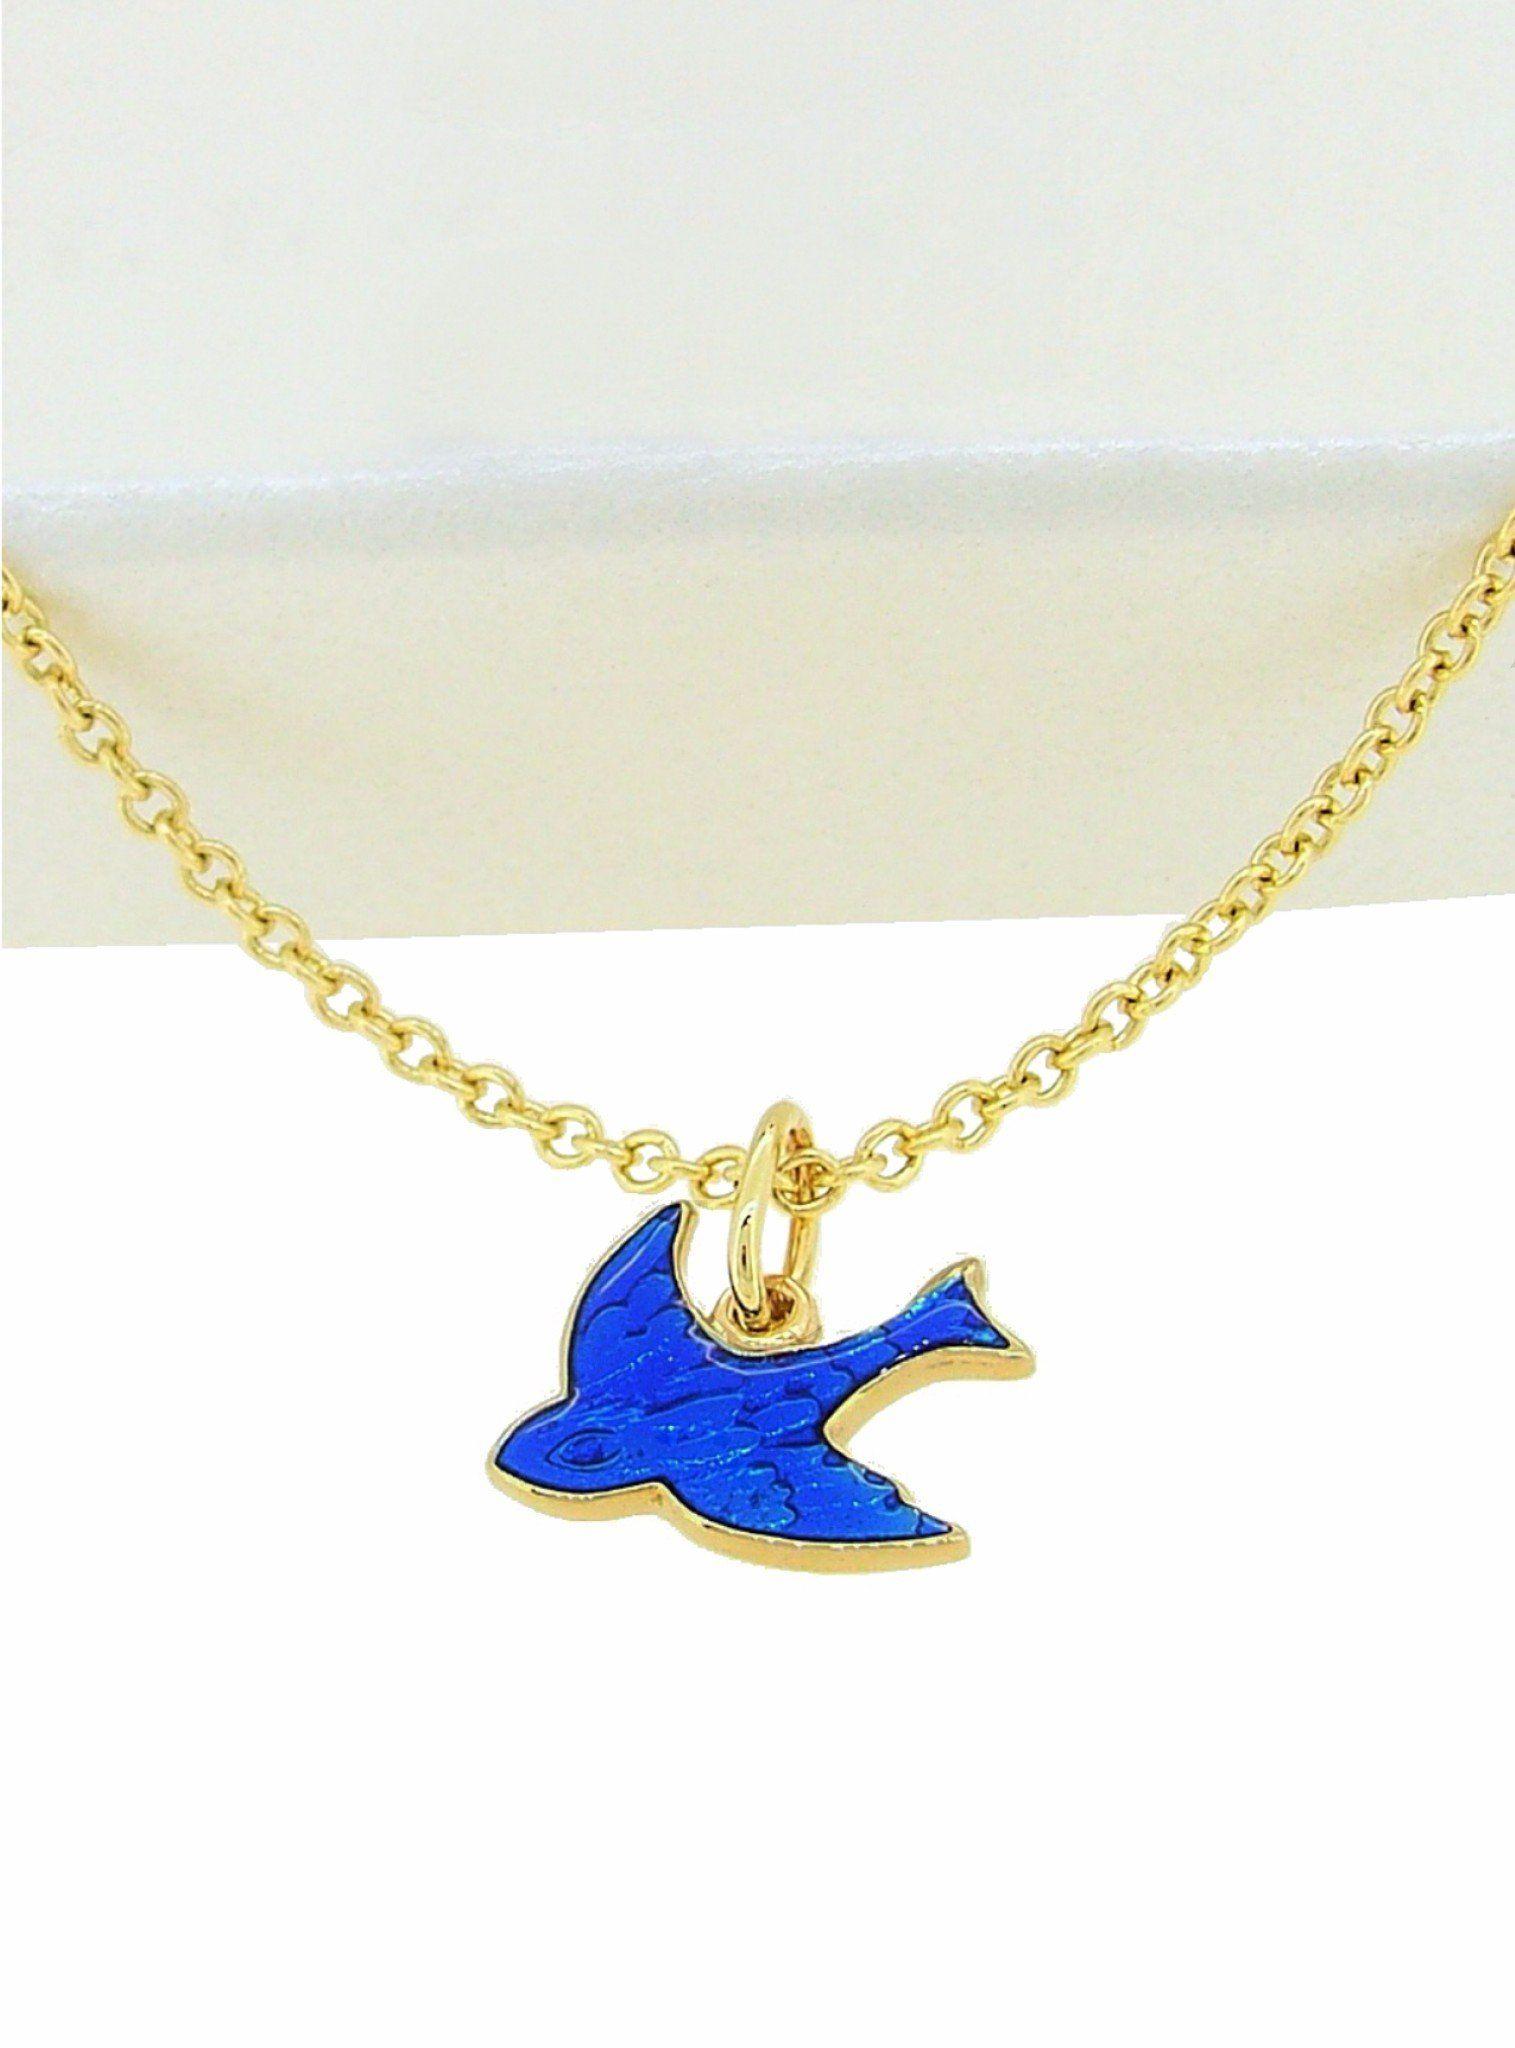 Gold and Blue Bird Logo - Bluebird of Happiness Love Heart Charm Necklace and Earrings Set